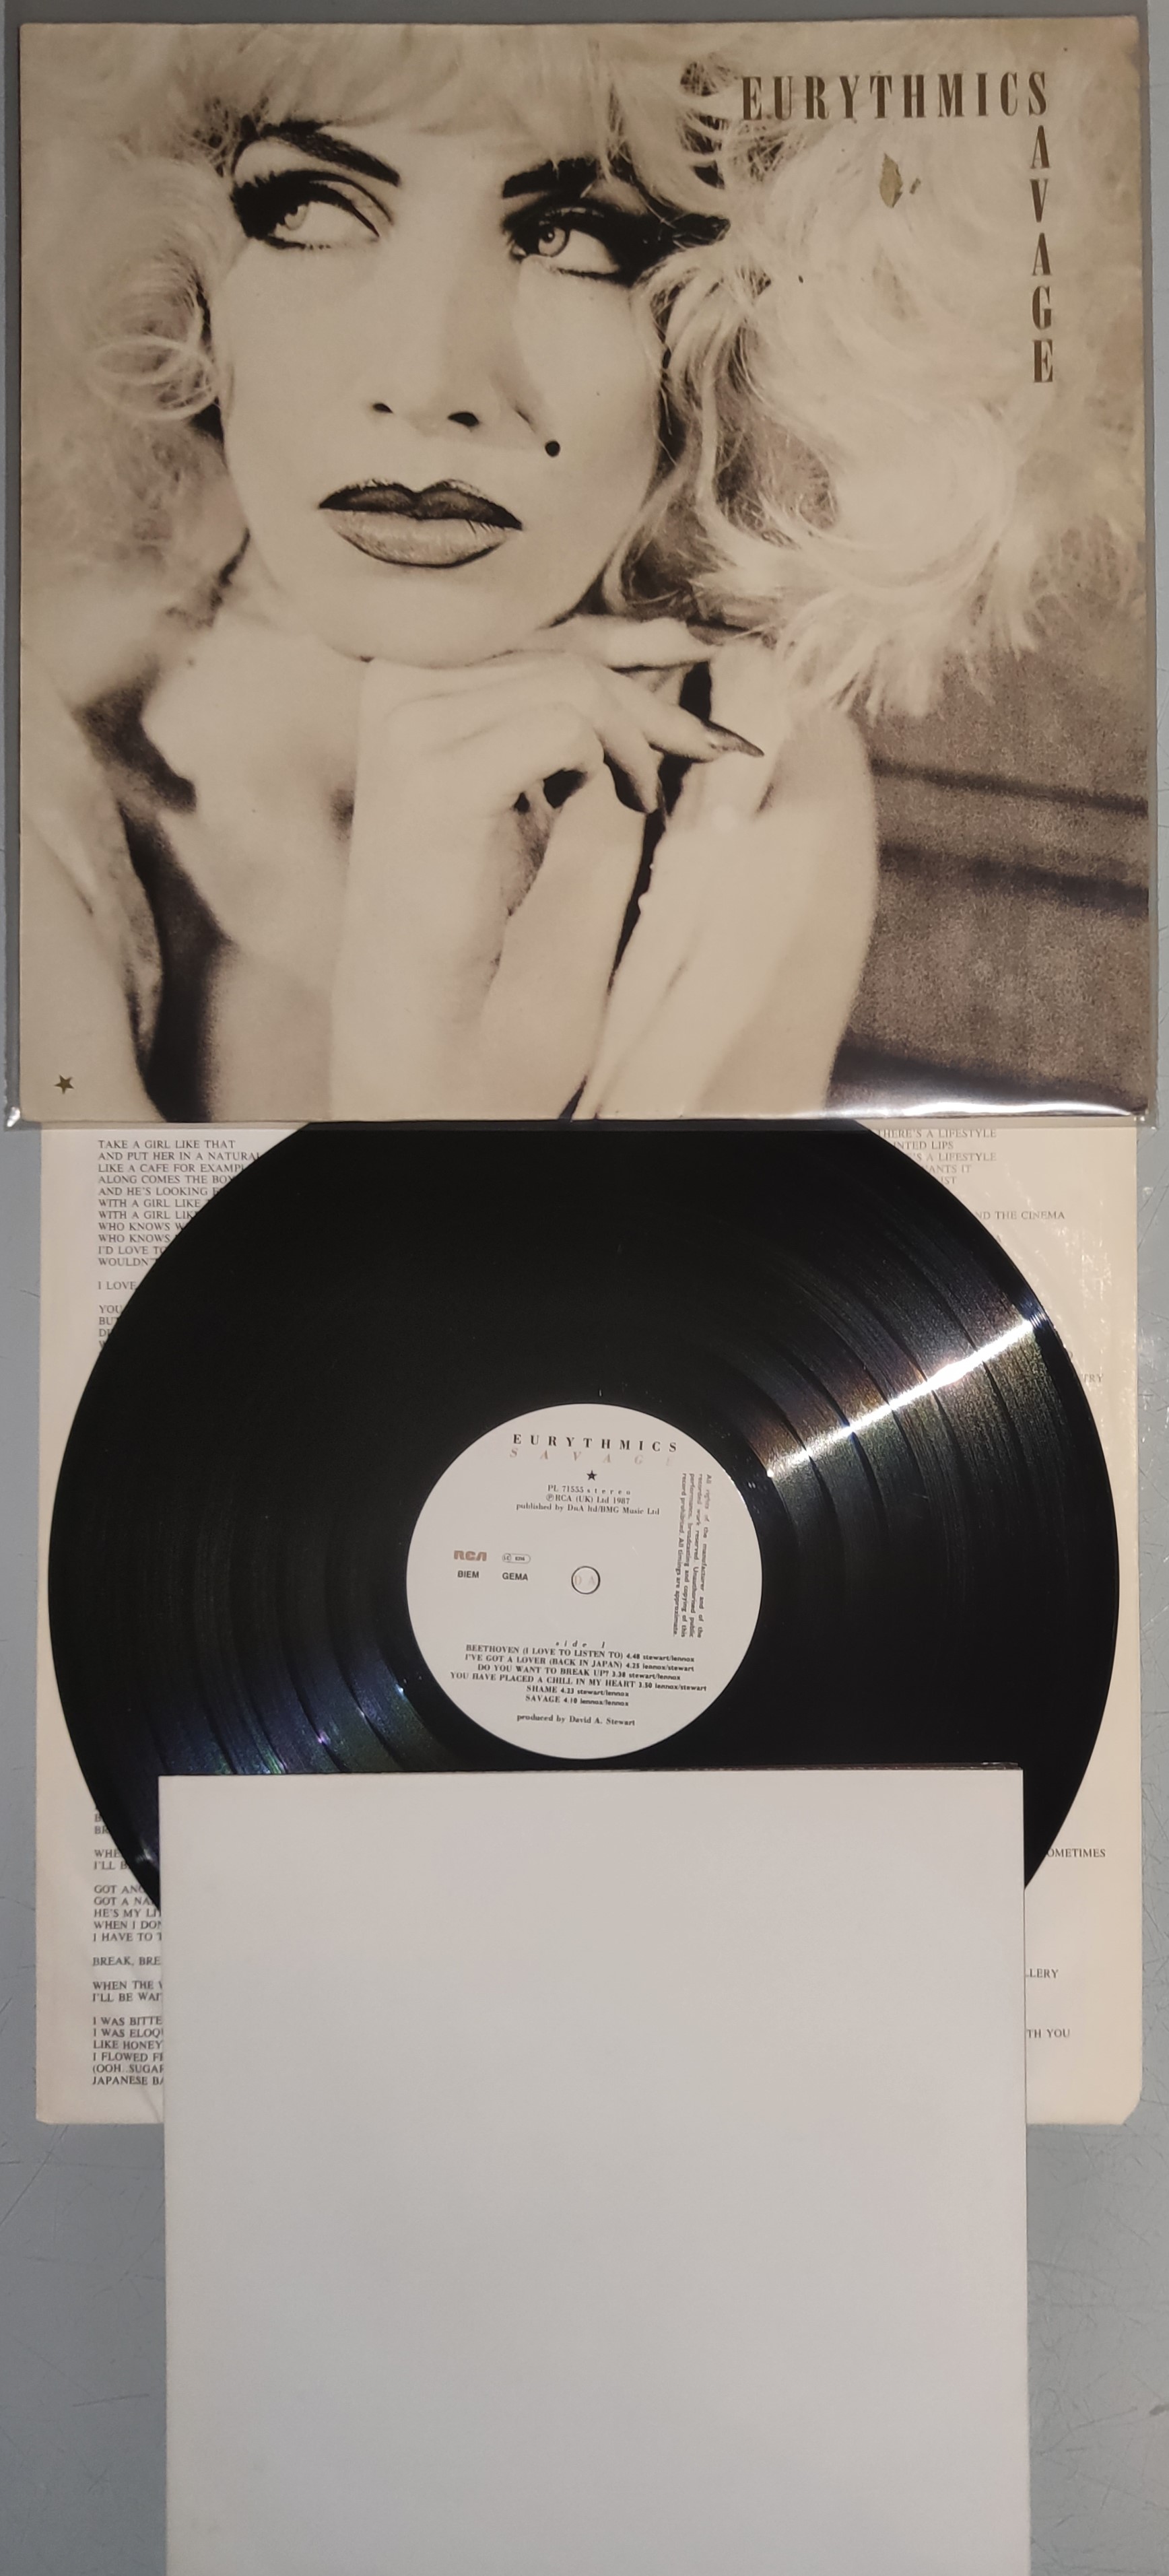 A Collection of 12 x Eurythmics / Annie Lennox New Wave Vinyl LPs and 12” Single. - Image 2 of 9